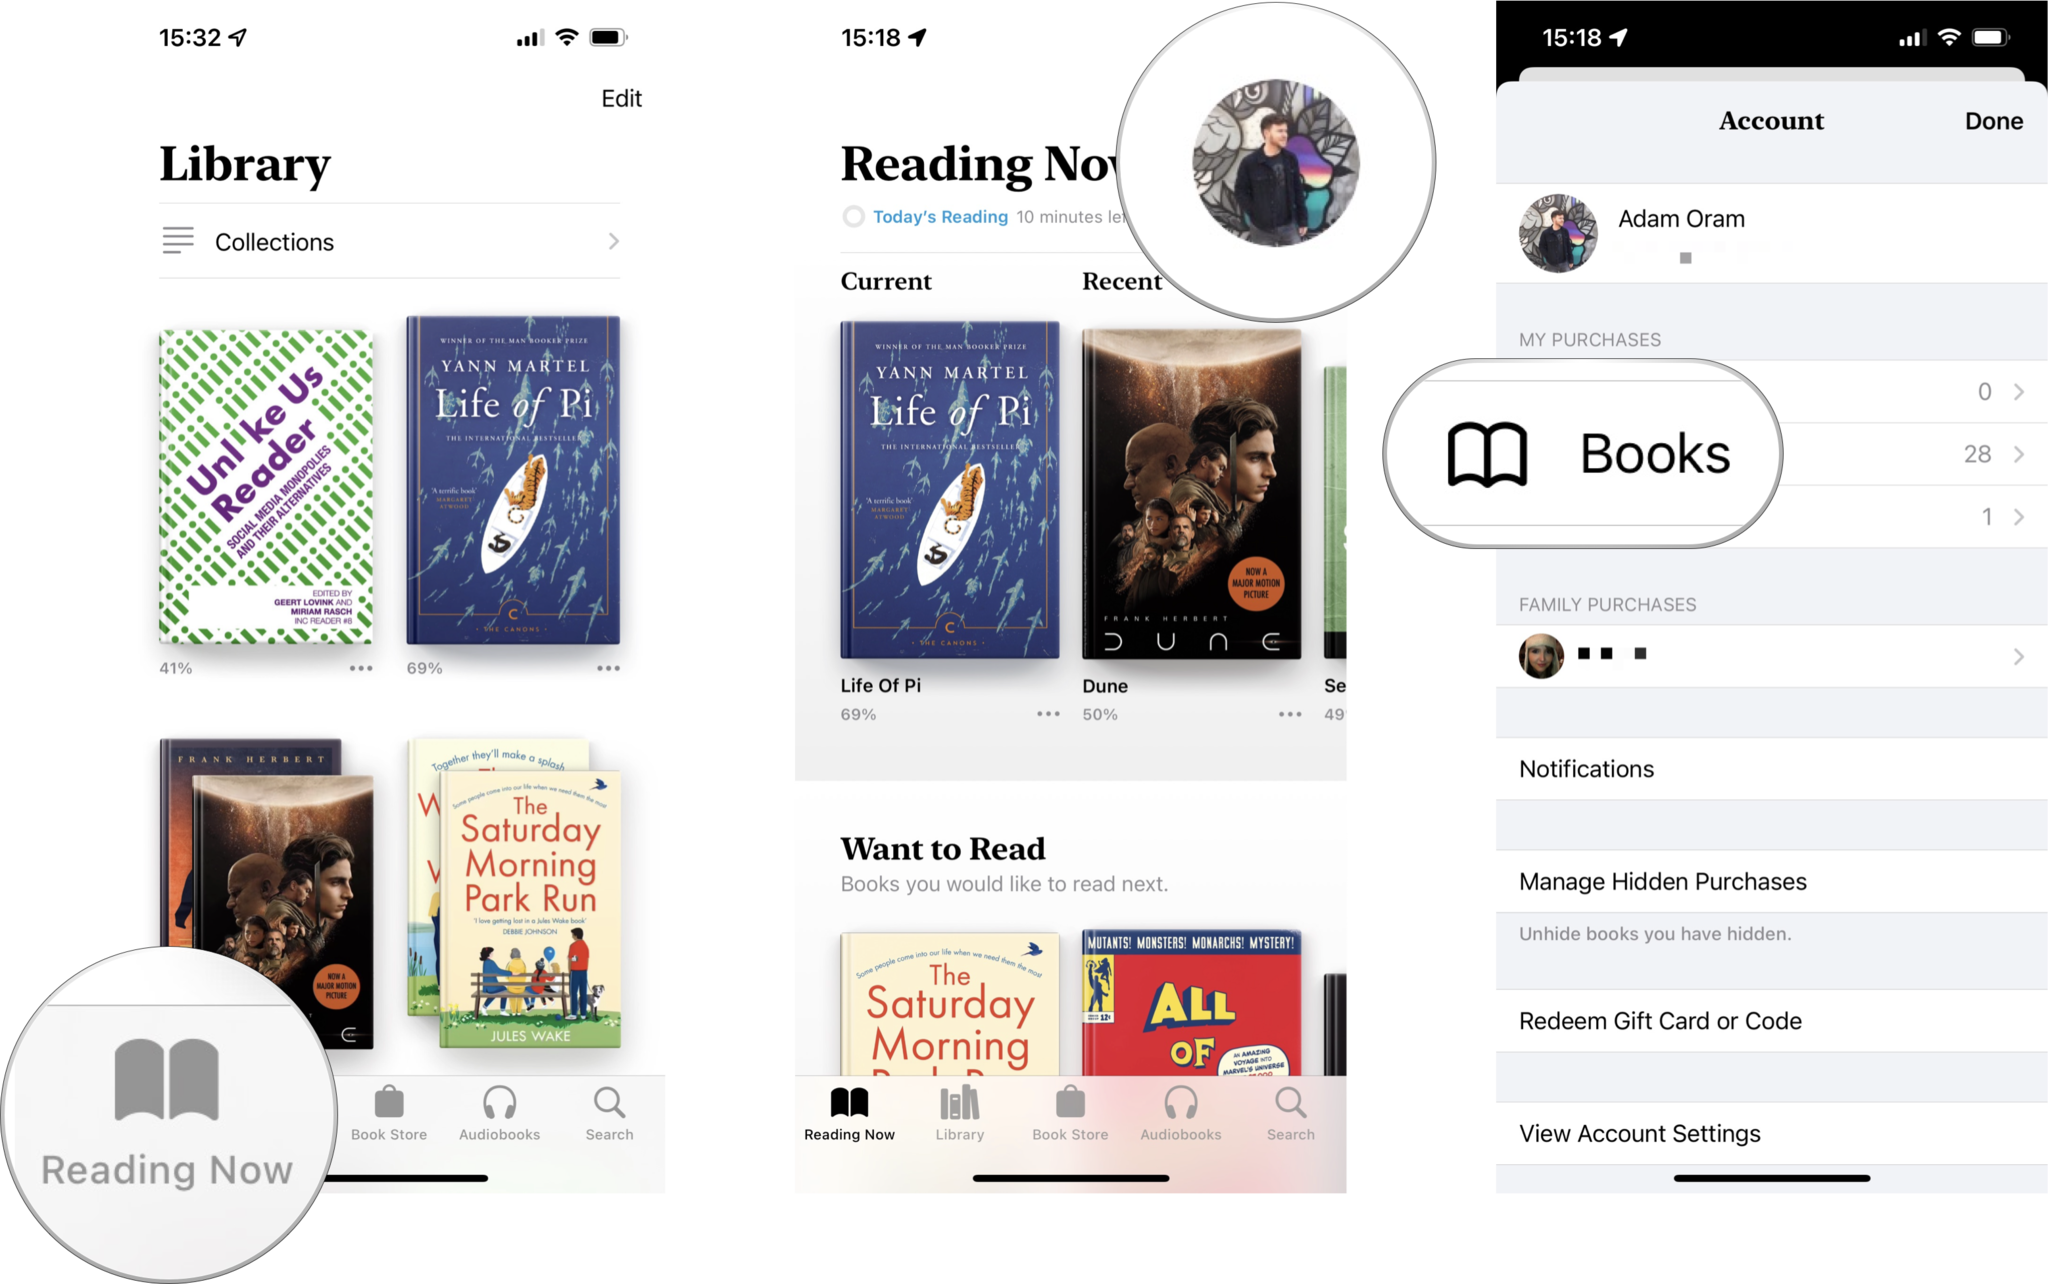 How to a re-download book in Apple Books: Tap on Reading Now, tap on your account, tap on Books